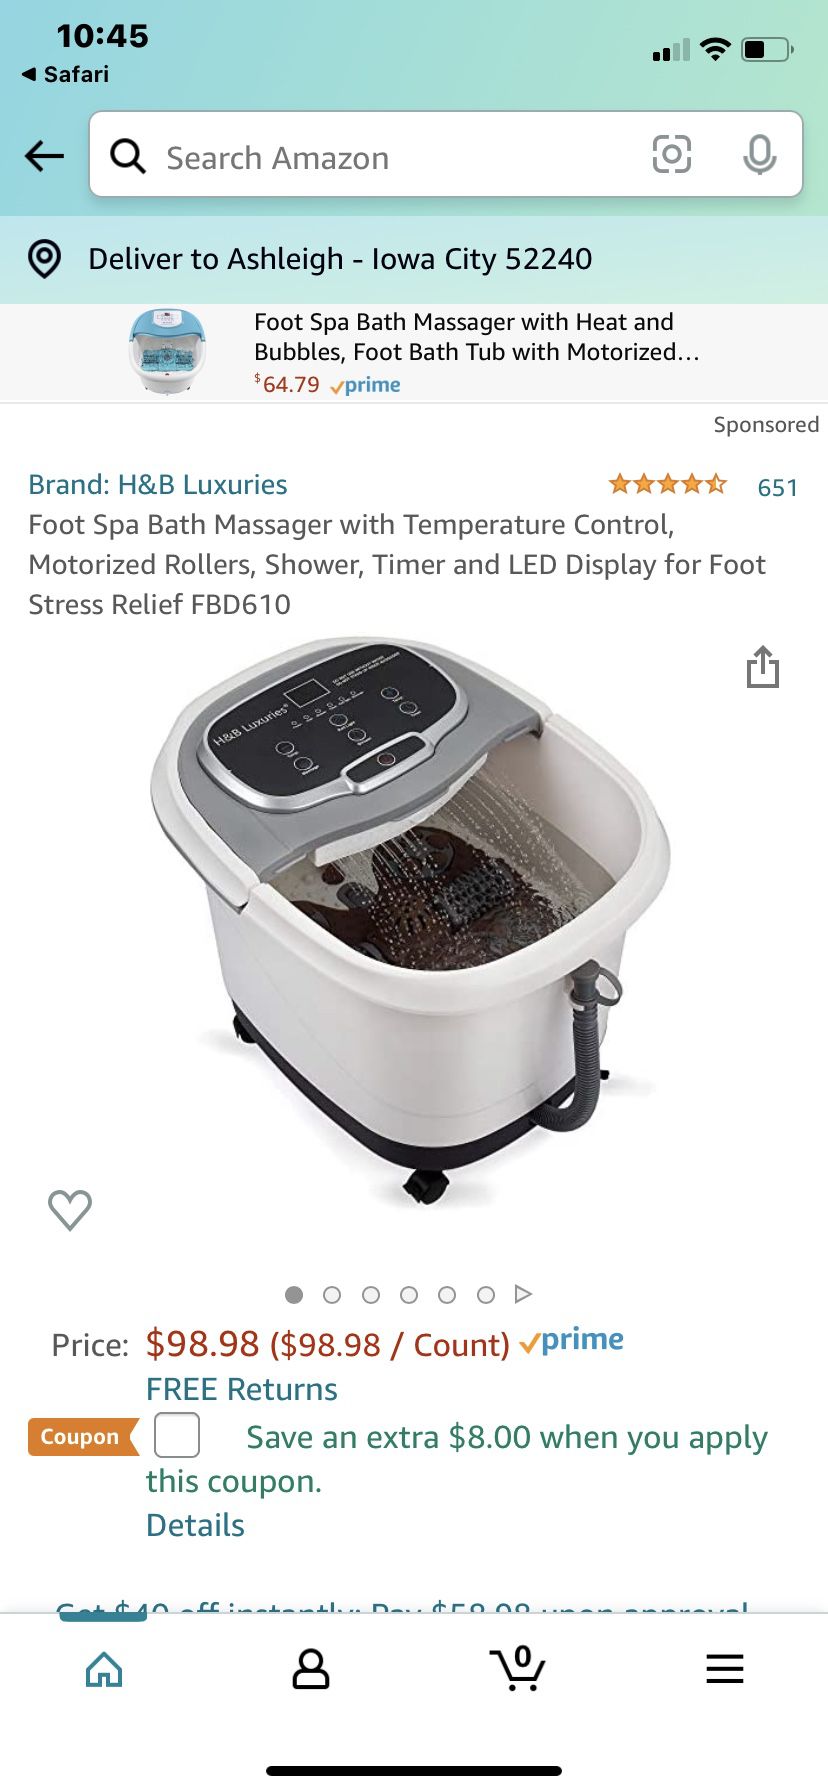 H&B Luxuries Foot Spa Bath Massager with Temperature Control, Motorized Rollers, Shower, Timer and LED Display for Foot Stress Relief FBD610